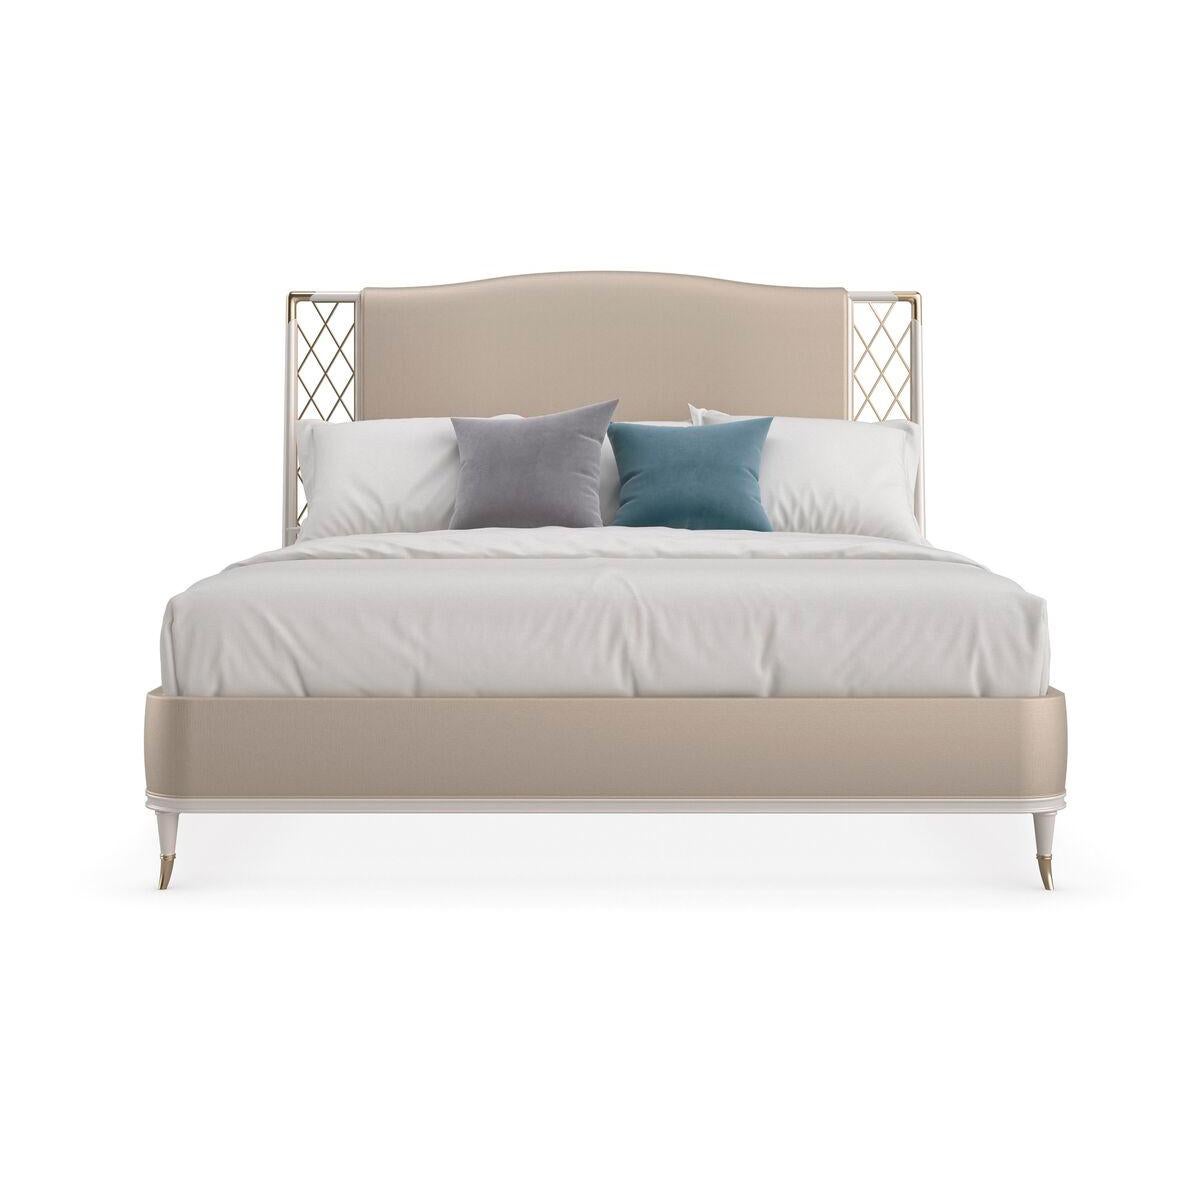 This upholstered bed features an ornate metal trellis with starry details. Dressed in a shimmering silver vinyl that’s easy to keep looking pristine, the subtly curved headboard, foot and side rails are beautifully balanced by a wood frame and